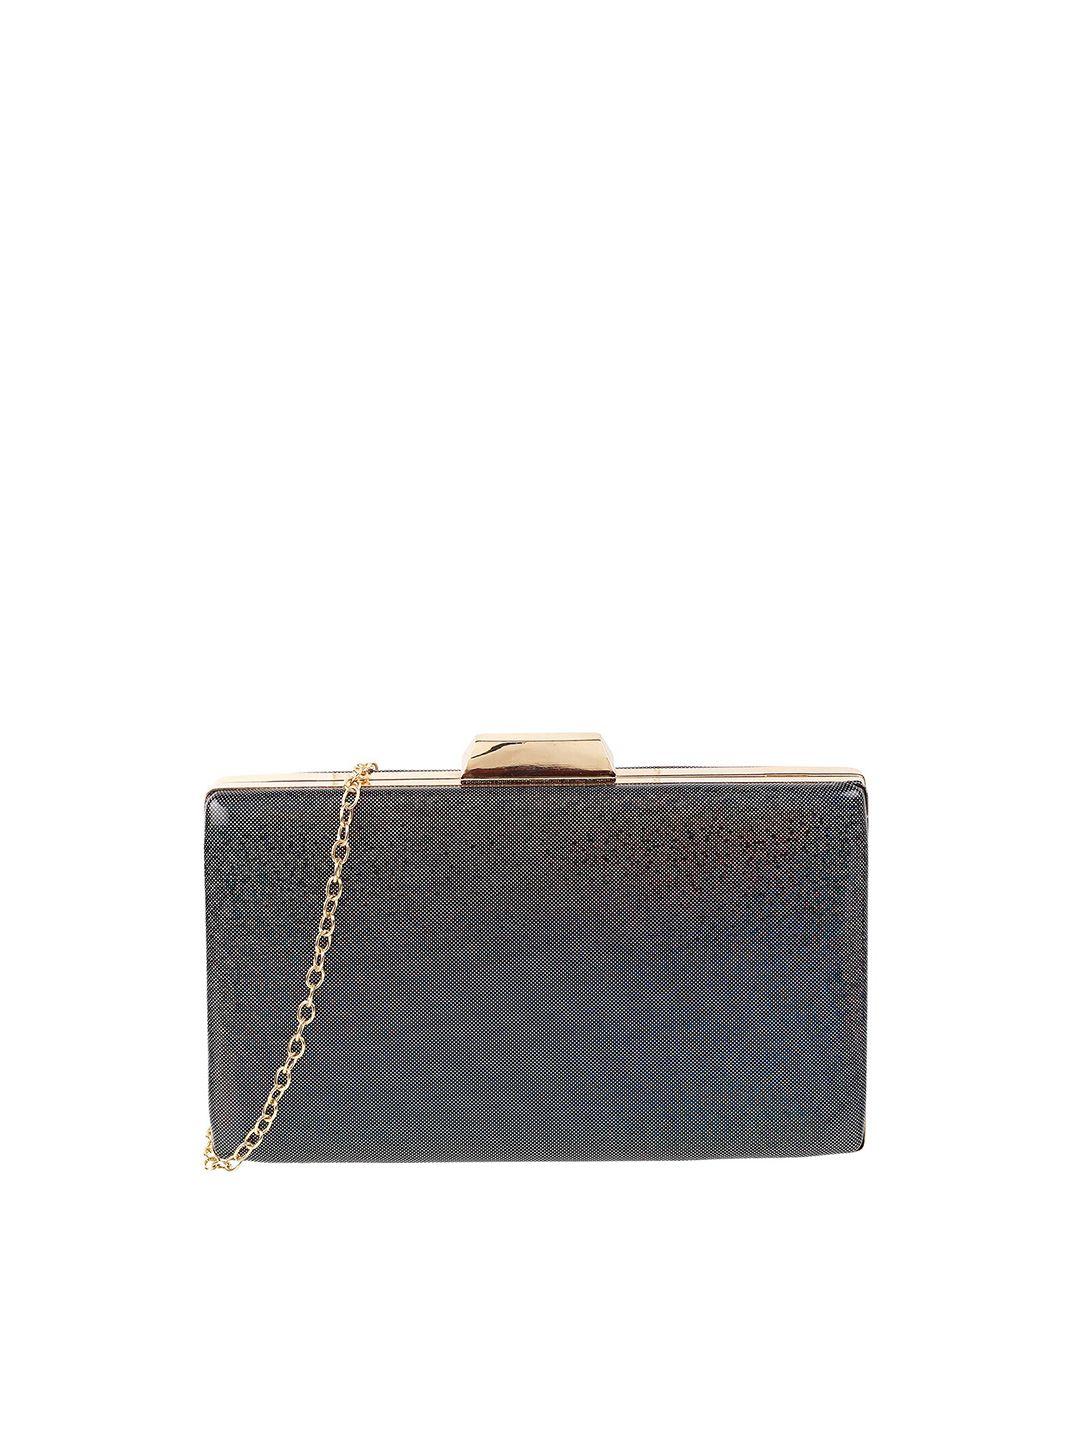 walkway by metro black & gold-toned textured box clutch